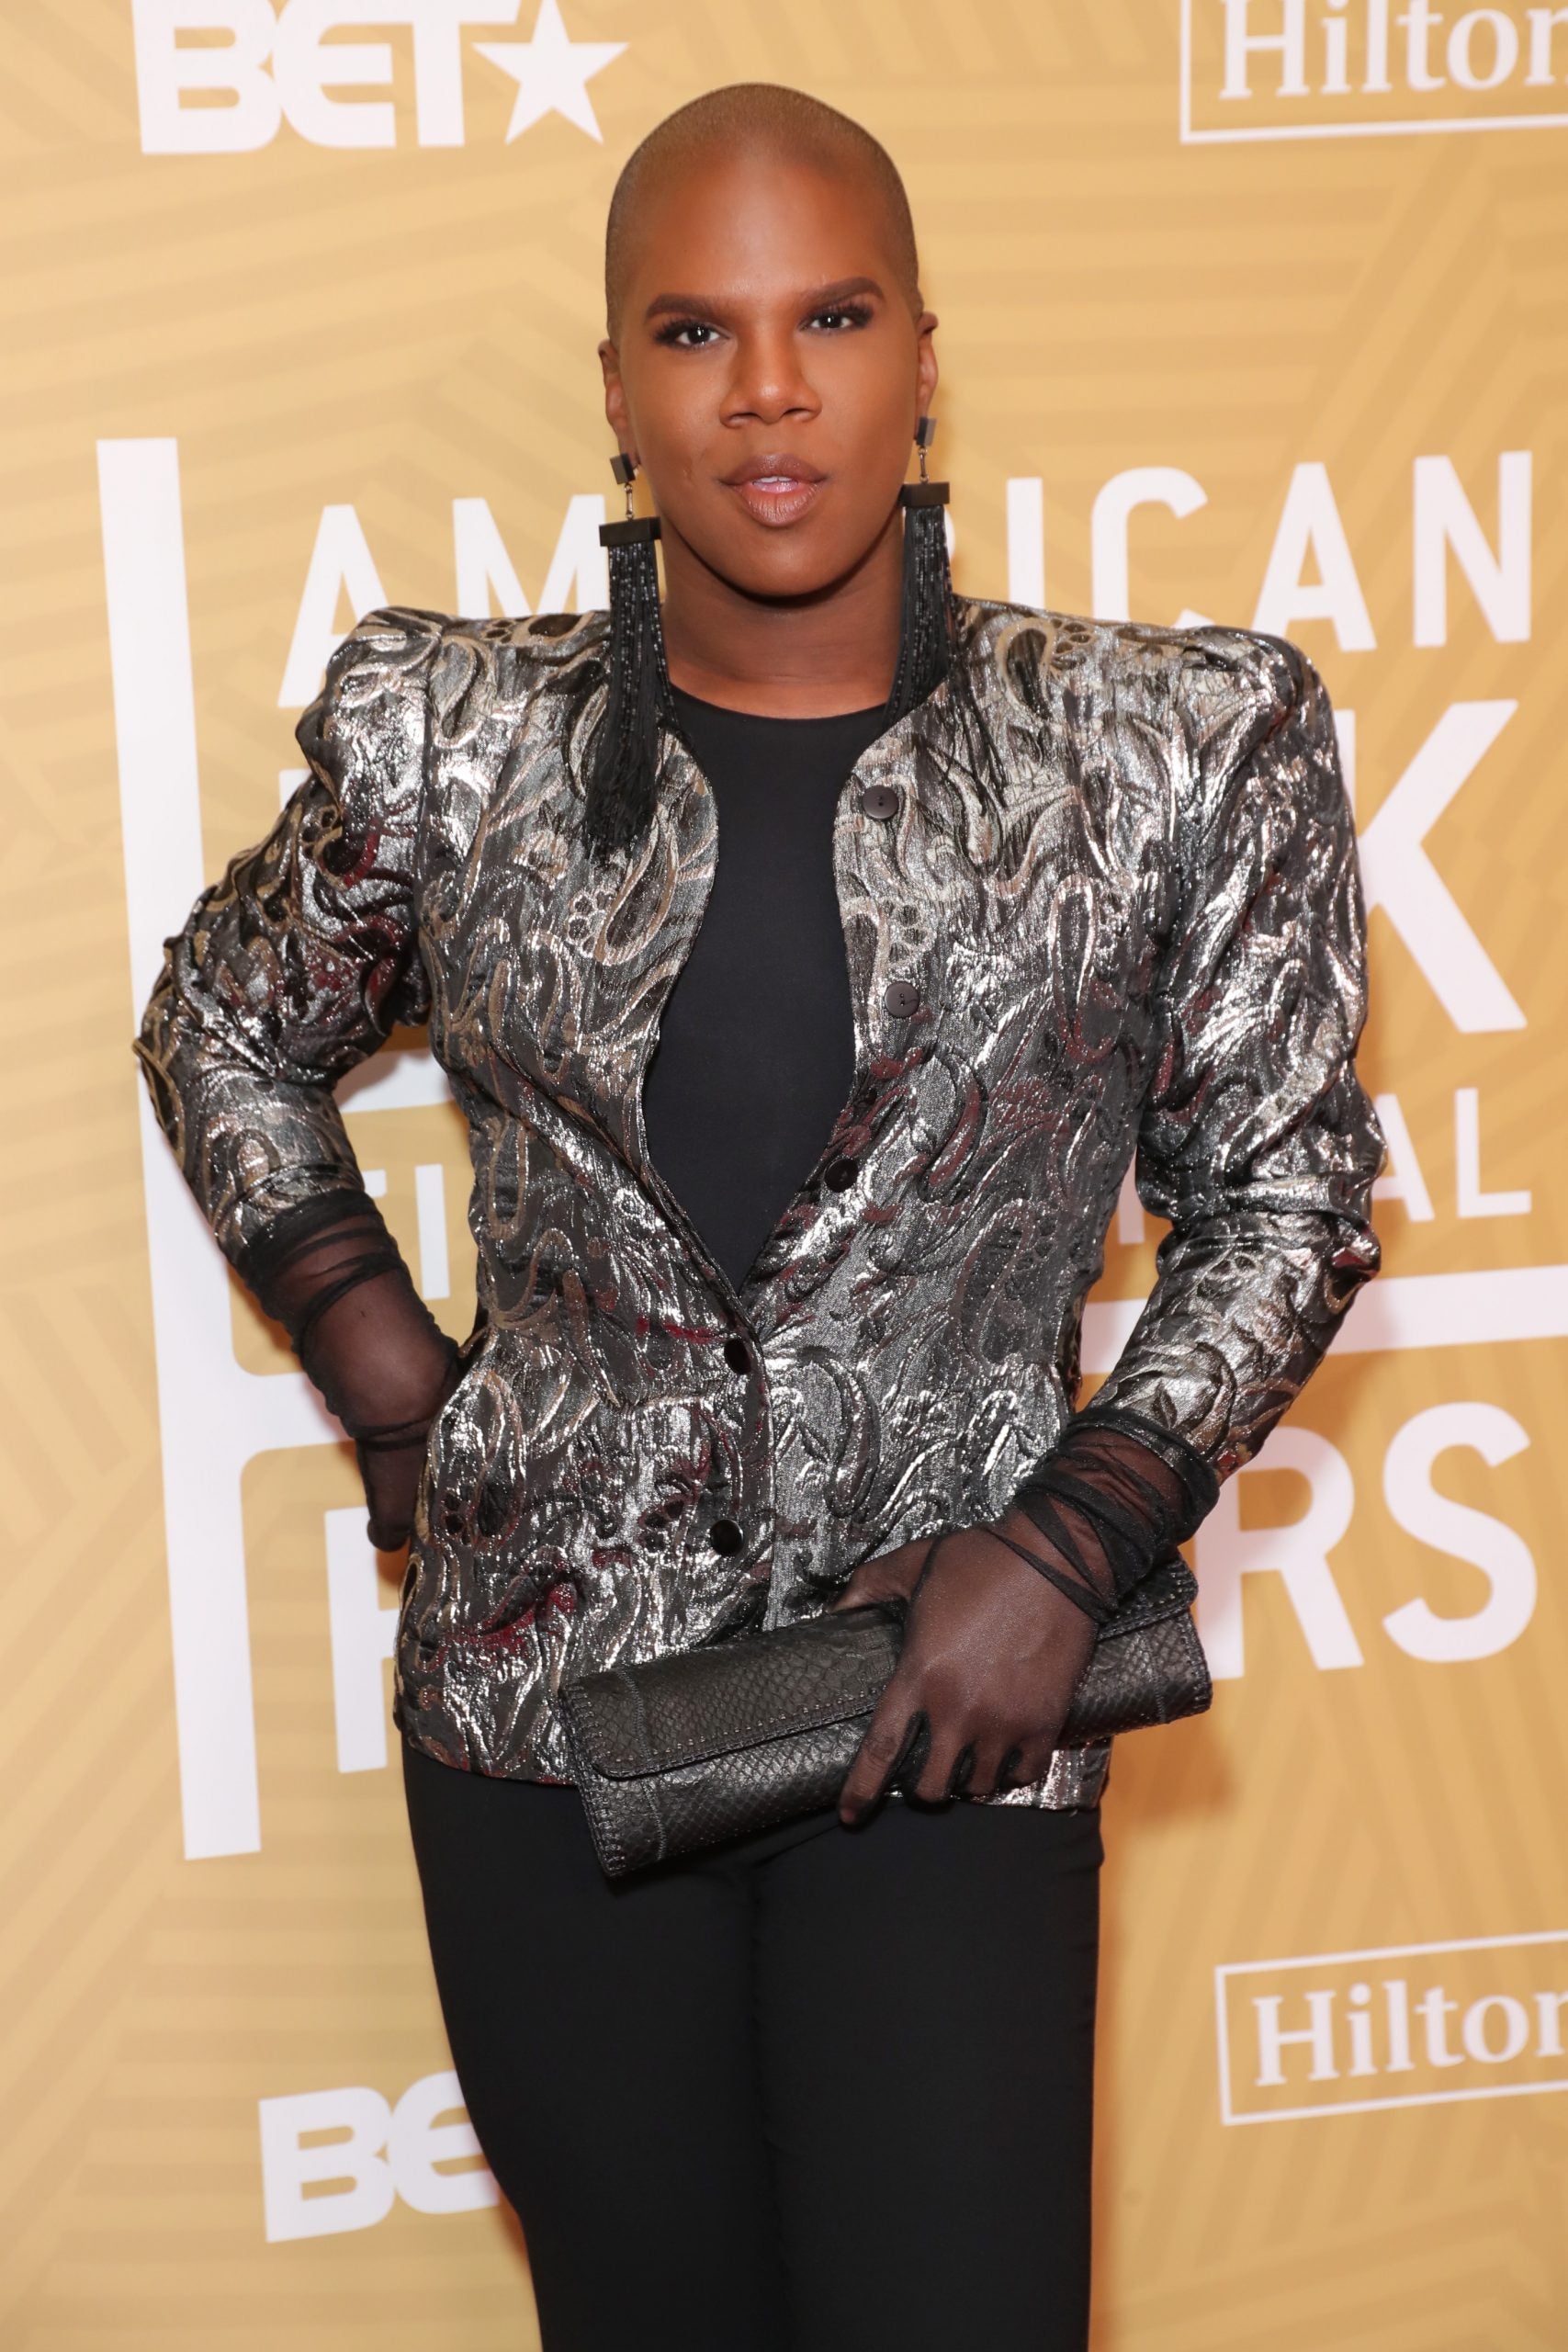 The Stars Shined Bright At The 2020 American Black Film Festival Honors